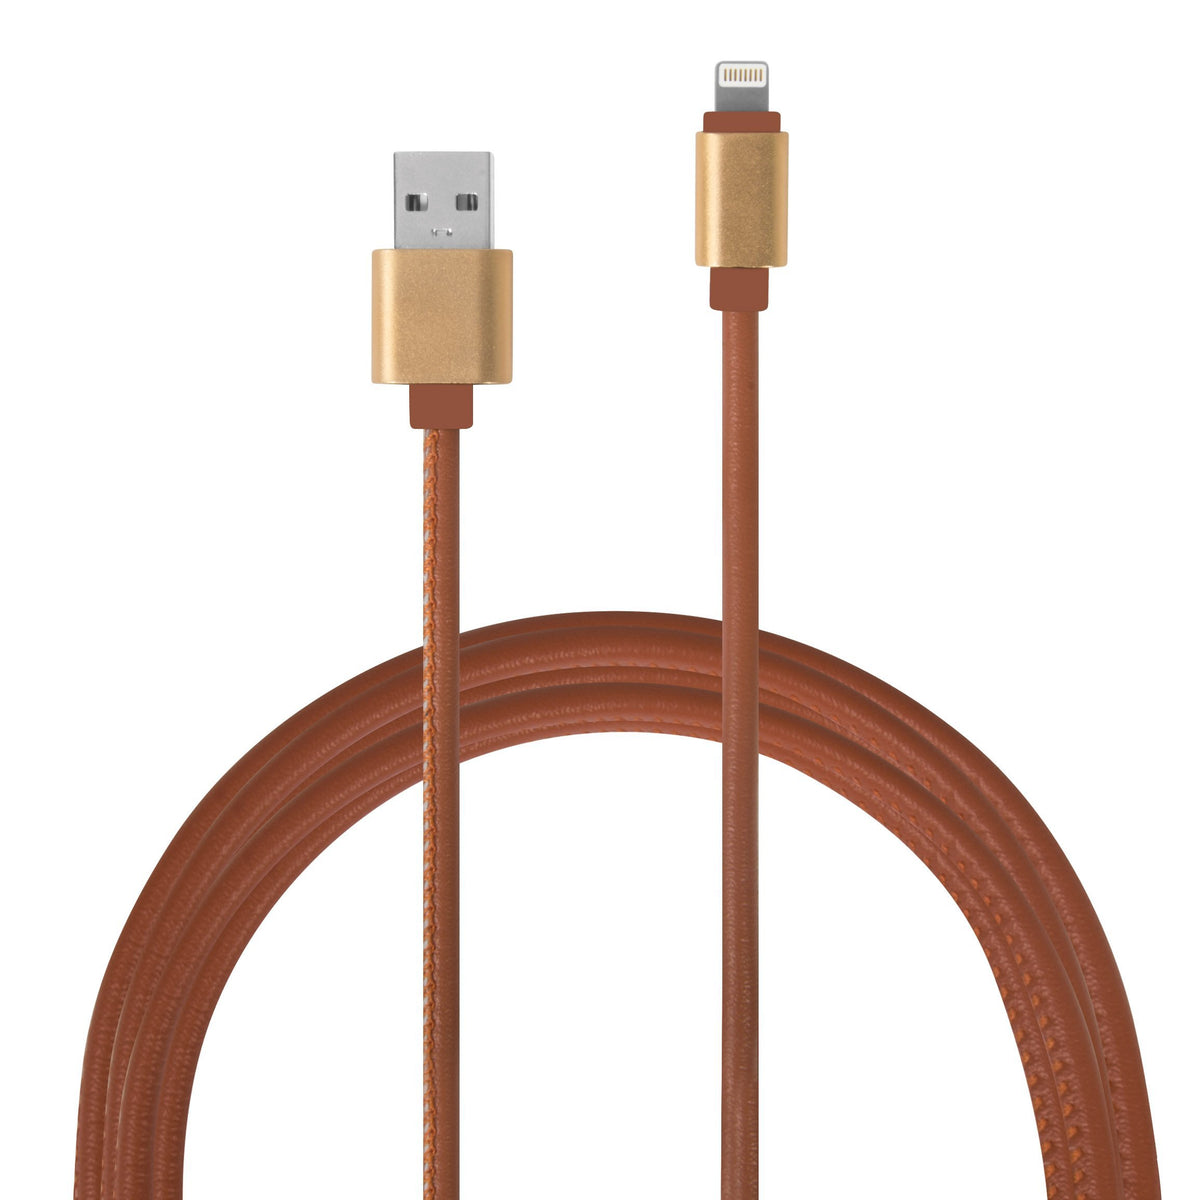 IS Gifts Mobile Phone Accessories Tan / Micro USB (Android) Android/IOS PU Leather USB Charging Cable - 2mtr tween and teen